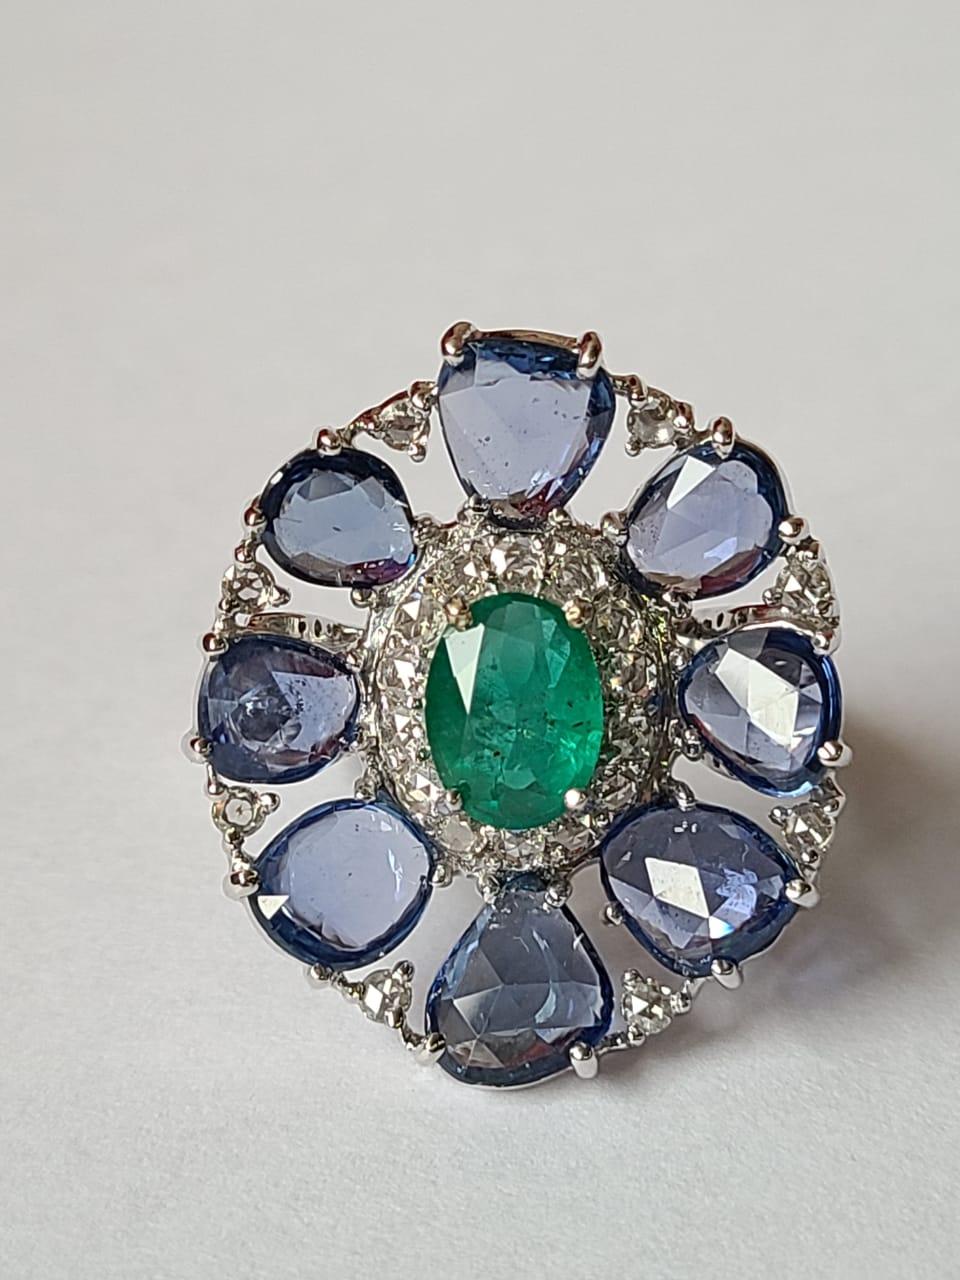 A very beautiful Blue Sapphires & Emerald Cocktail Ring set in 18K White Gold & Diamonds. The weight of the Blue Sapphires Rose Cuts is 6.65 carats. The Blue Sapphires are of Ceylon (Sri Lankan) origin. The weight of the Emerald is 1.32 carats. The